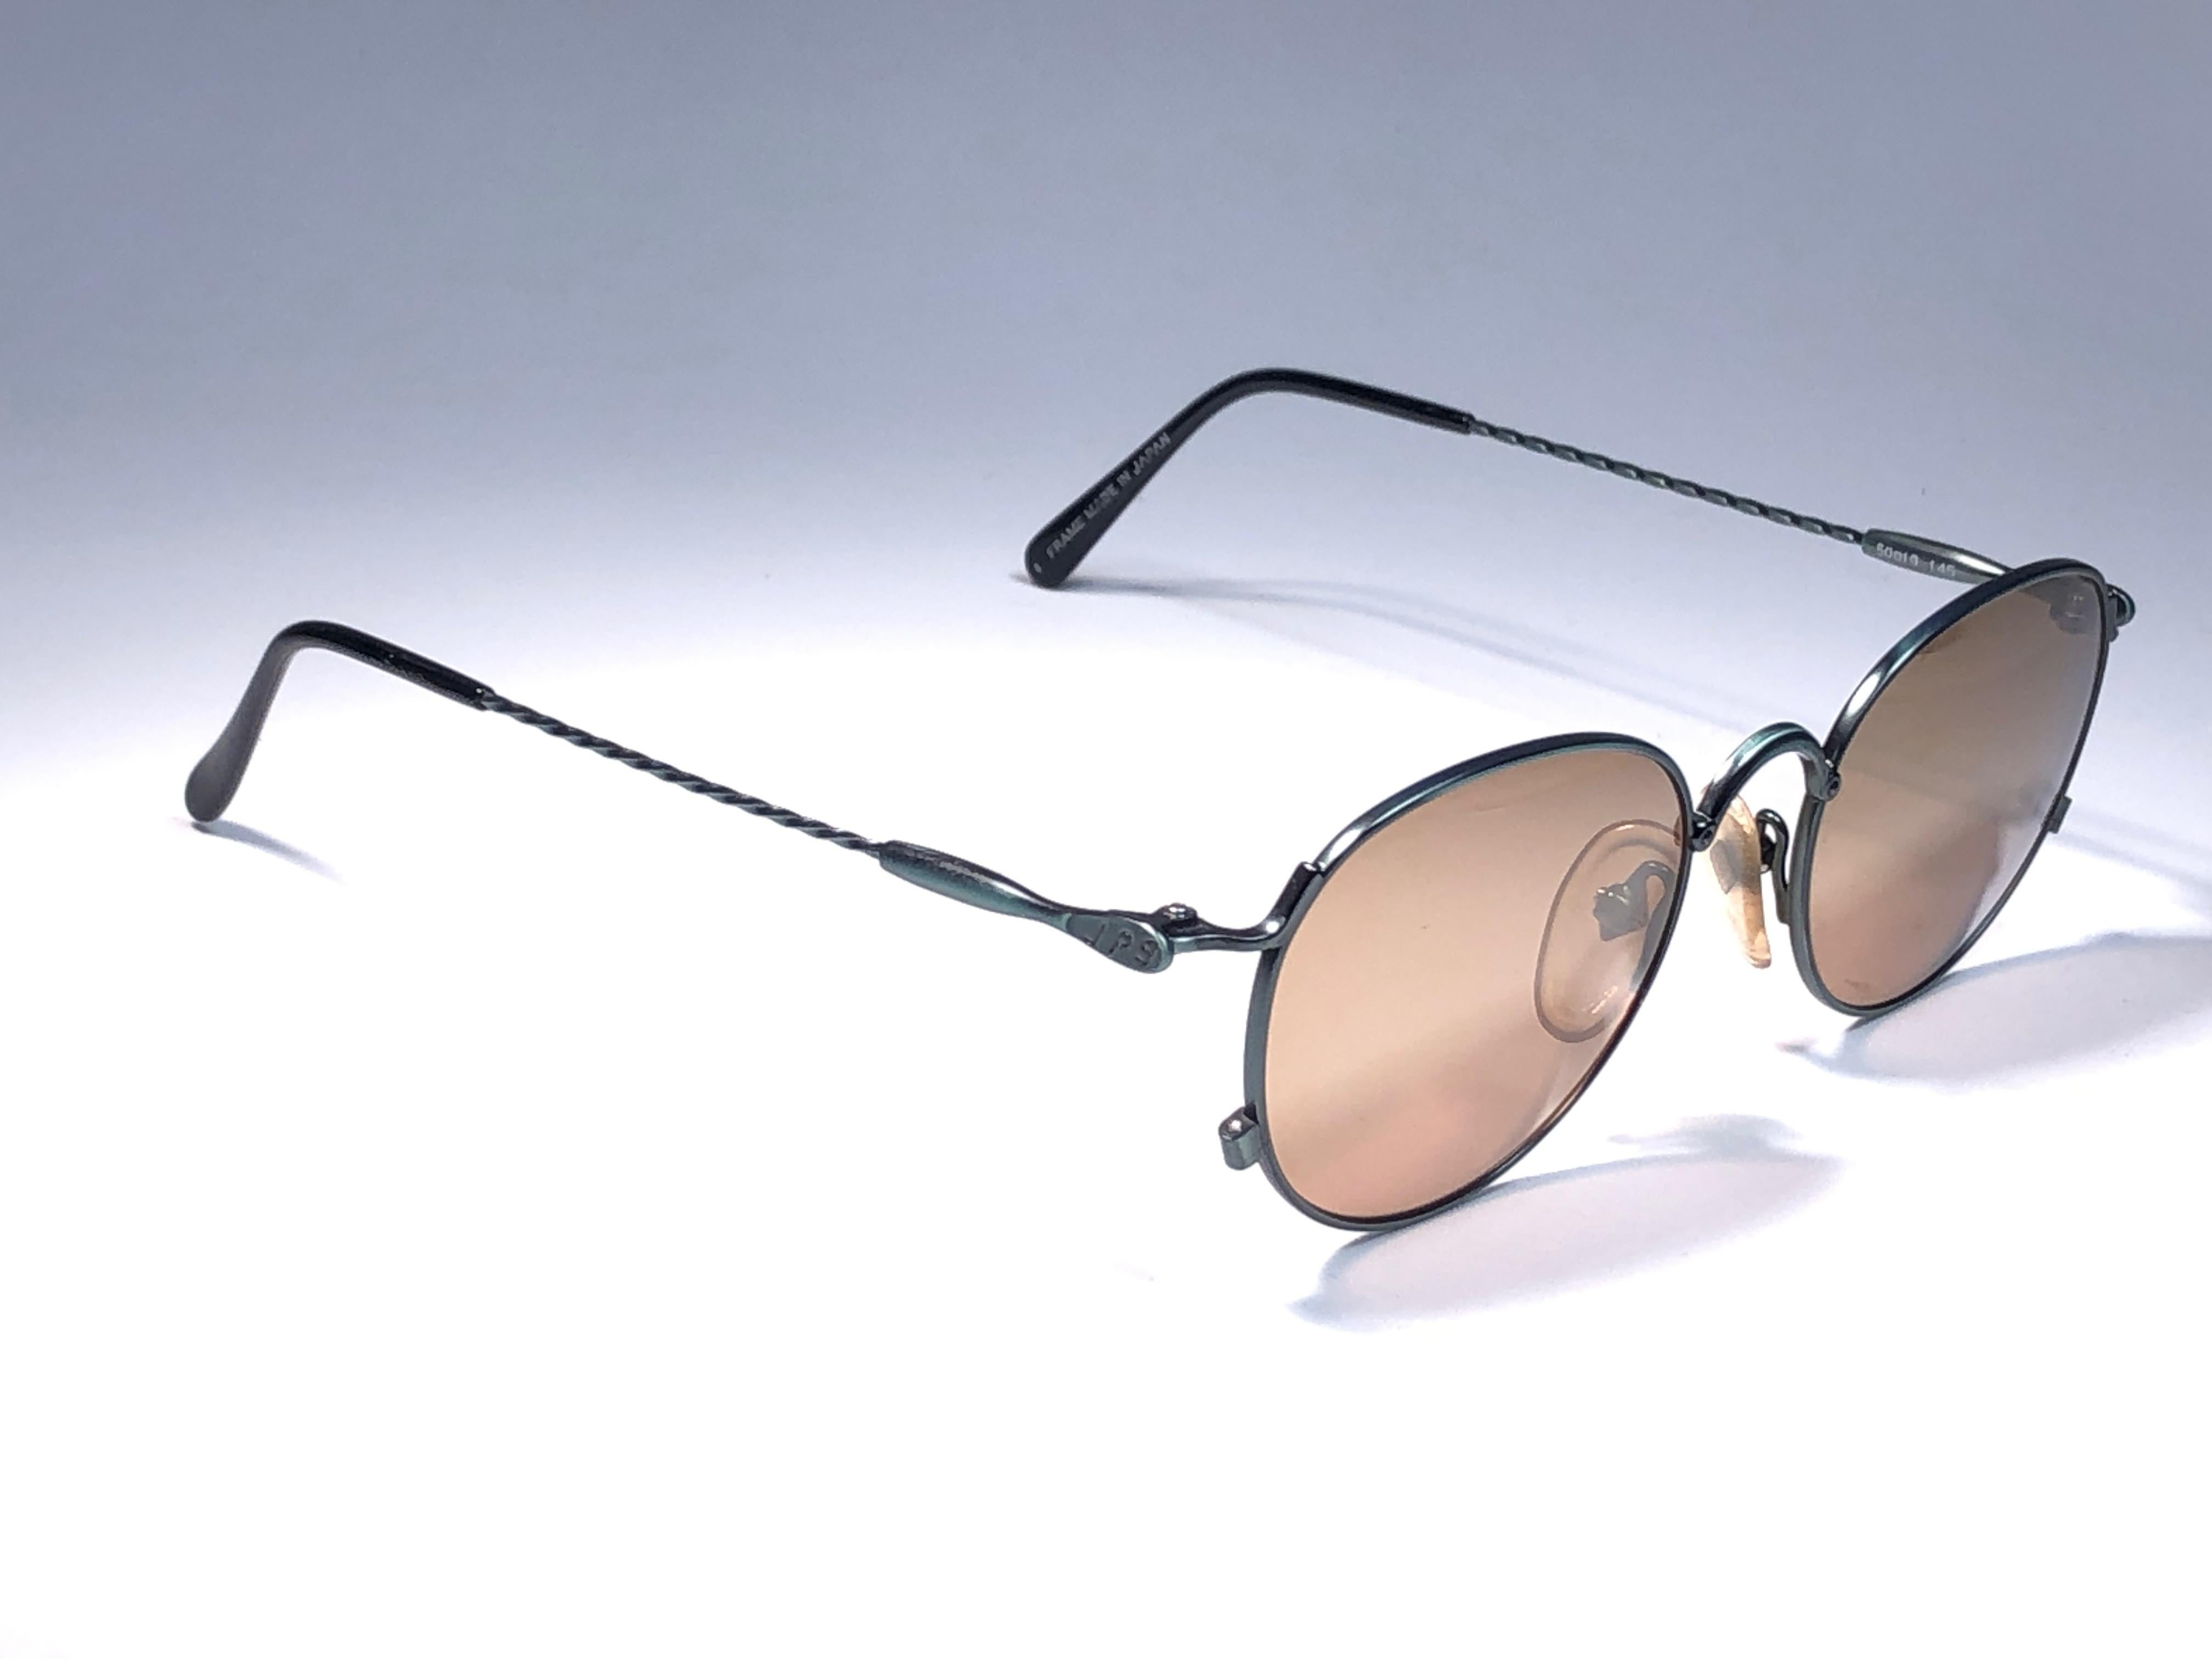 New Jean Paul Gaultier Junior 55 2172 Sunglasses 1990's Made in Japan  For Sale 3